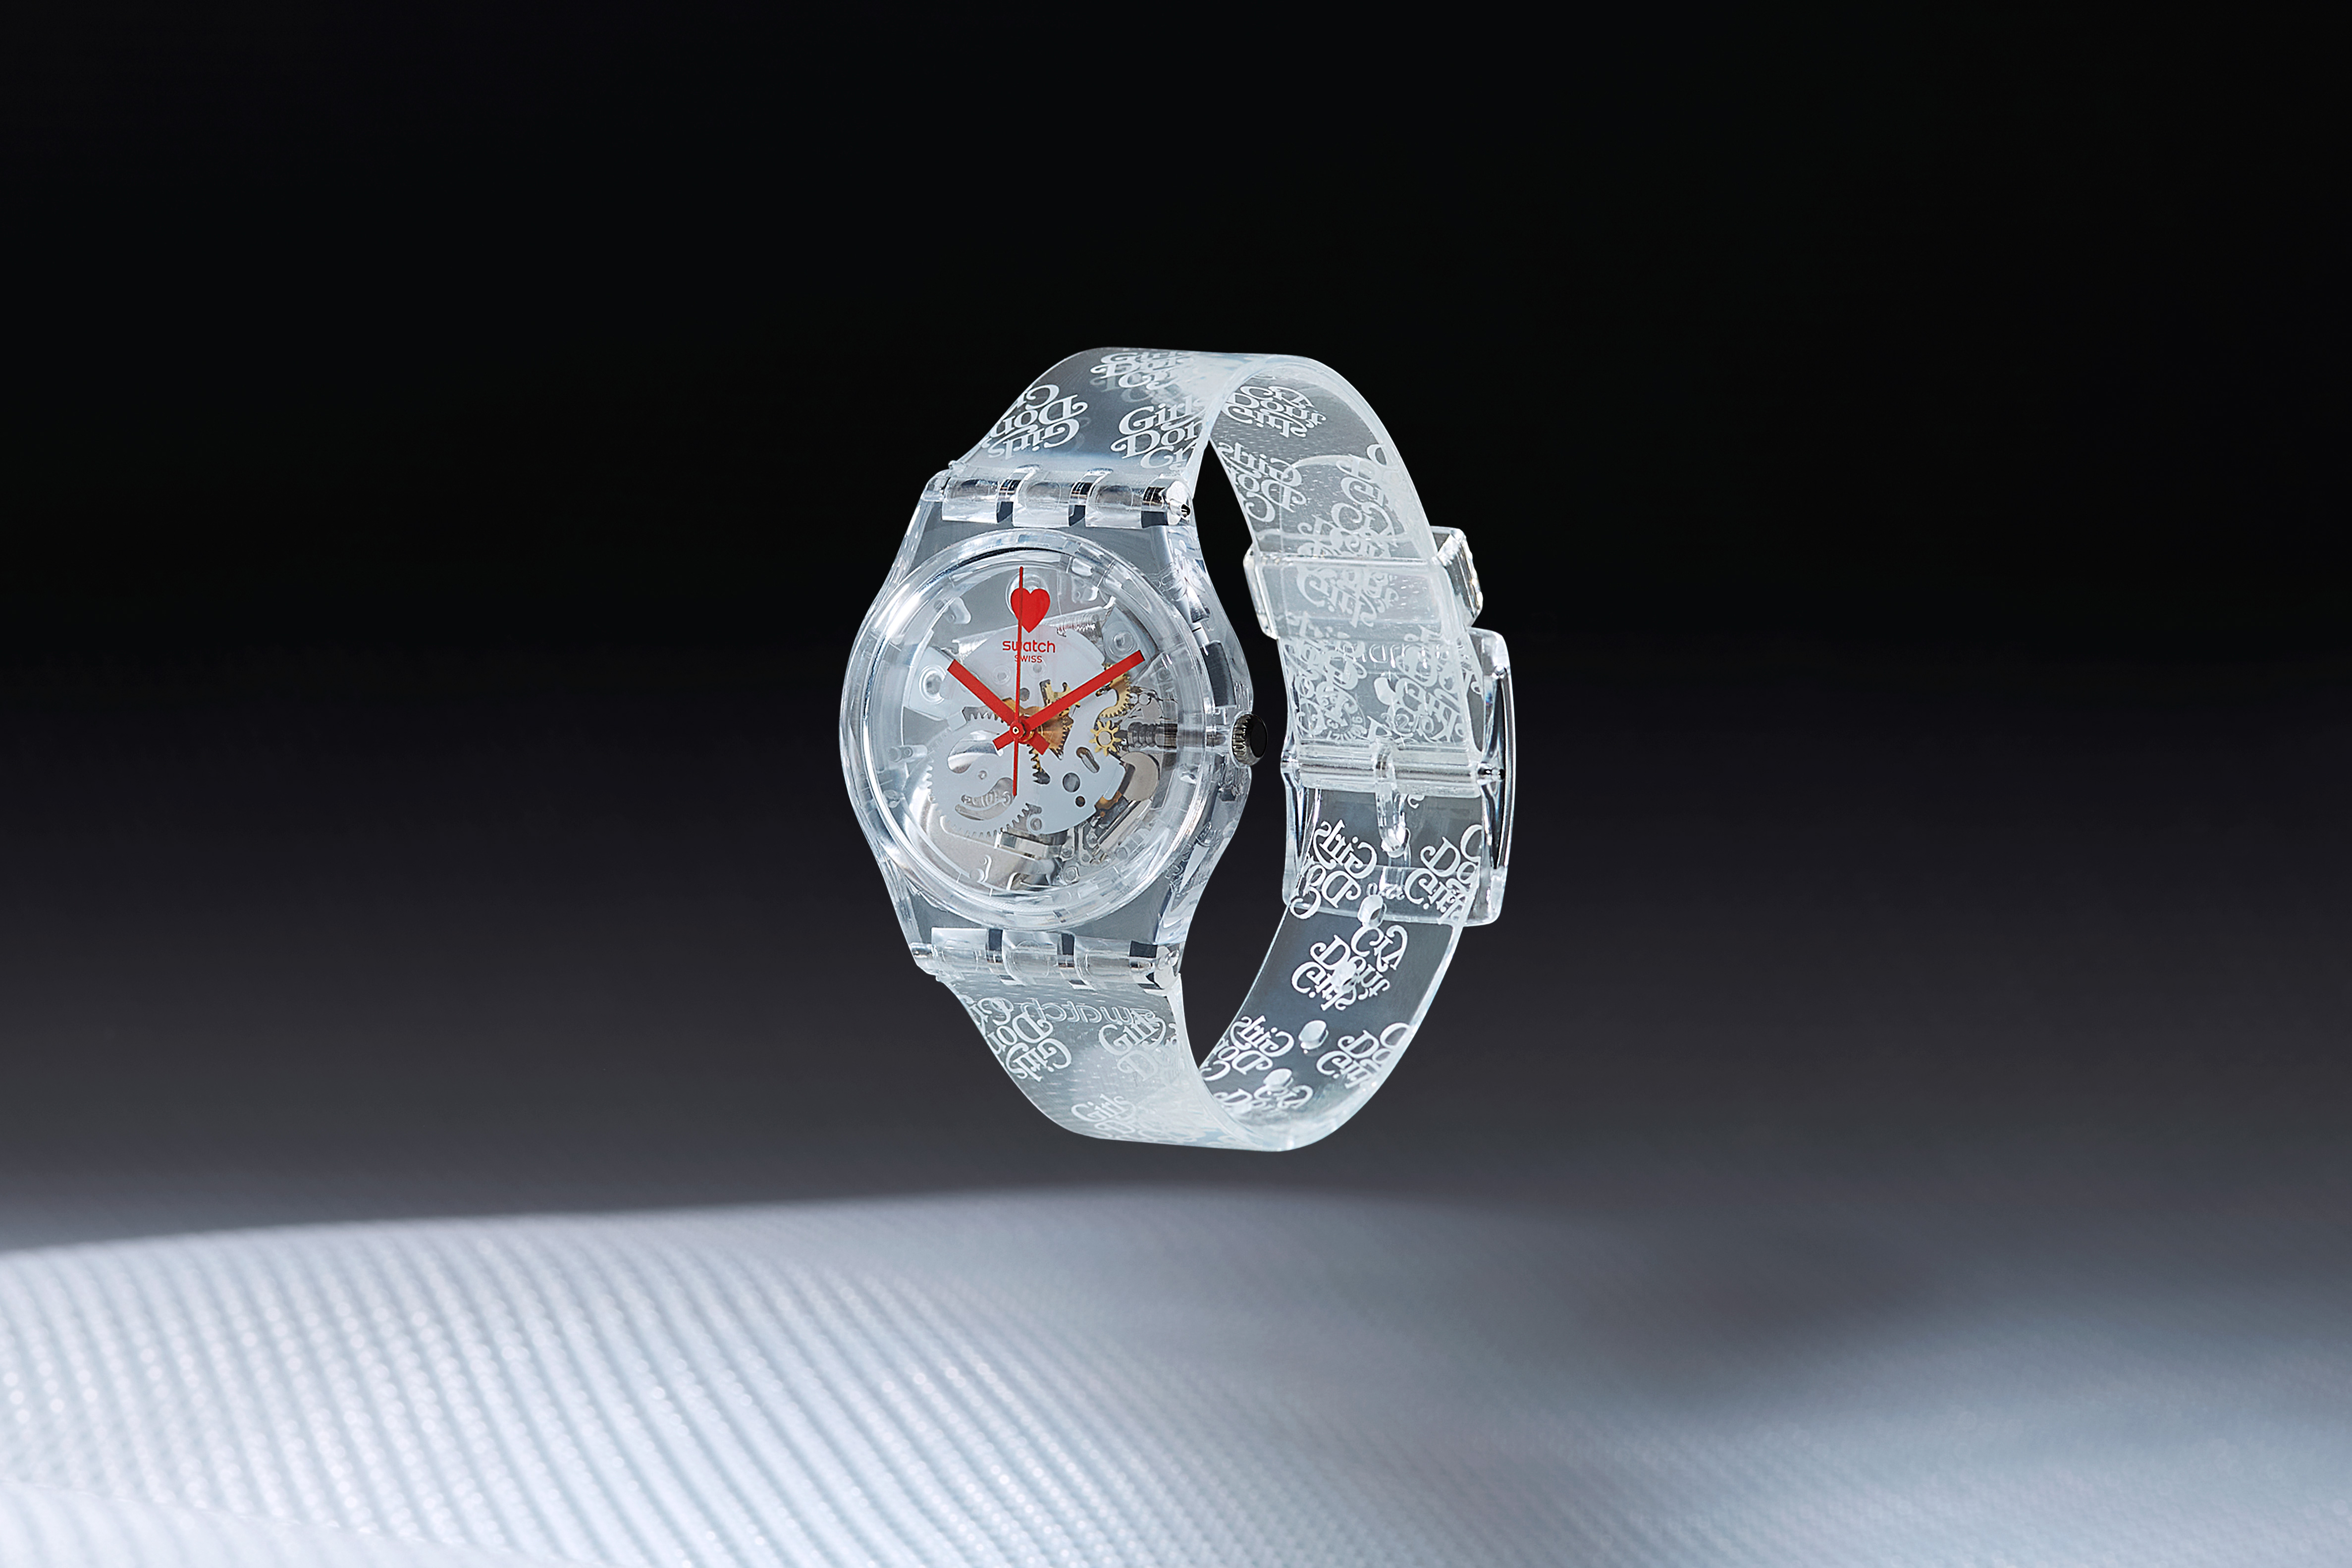 A transparent watch with red hands against a spacey background